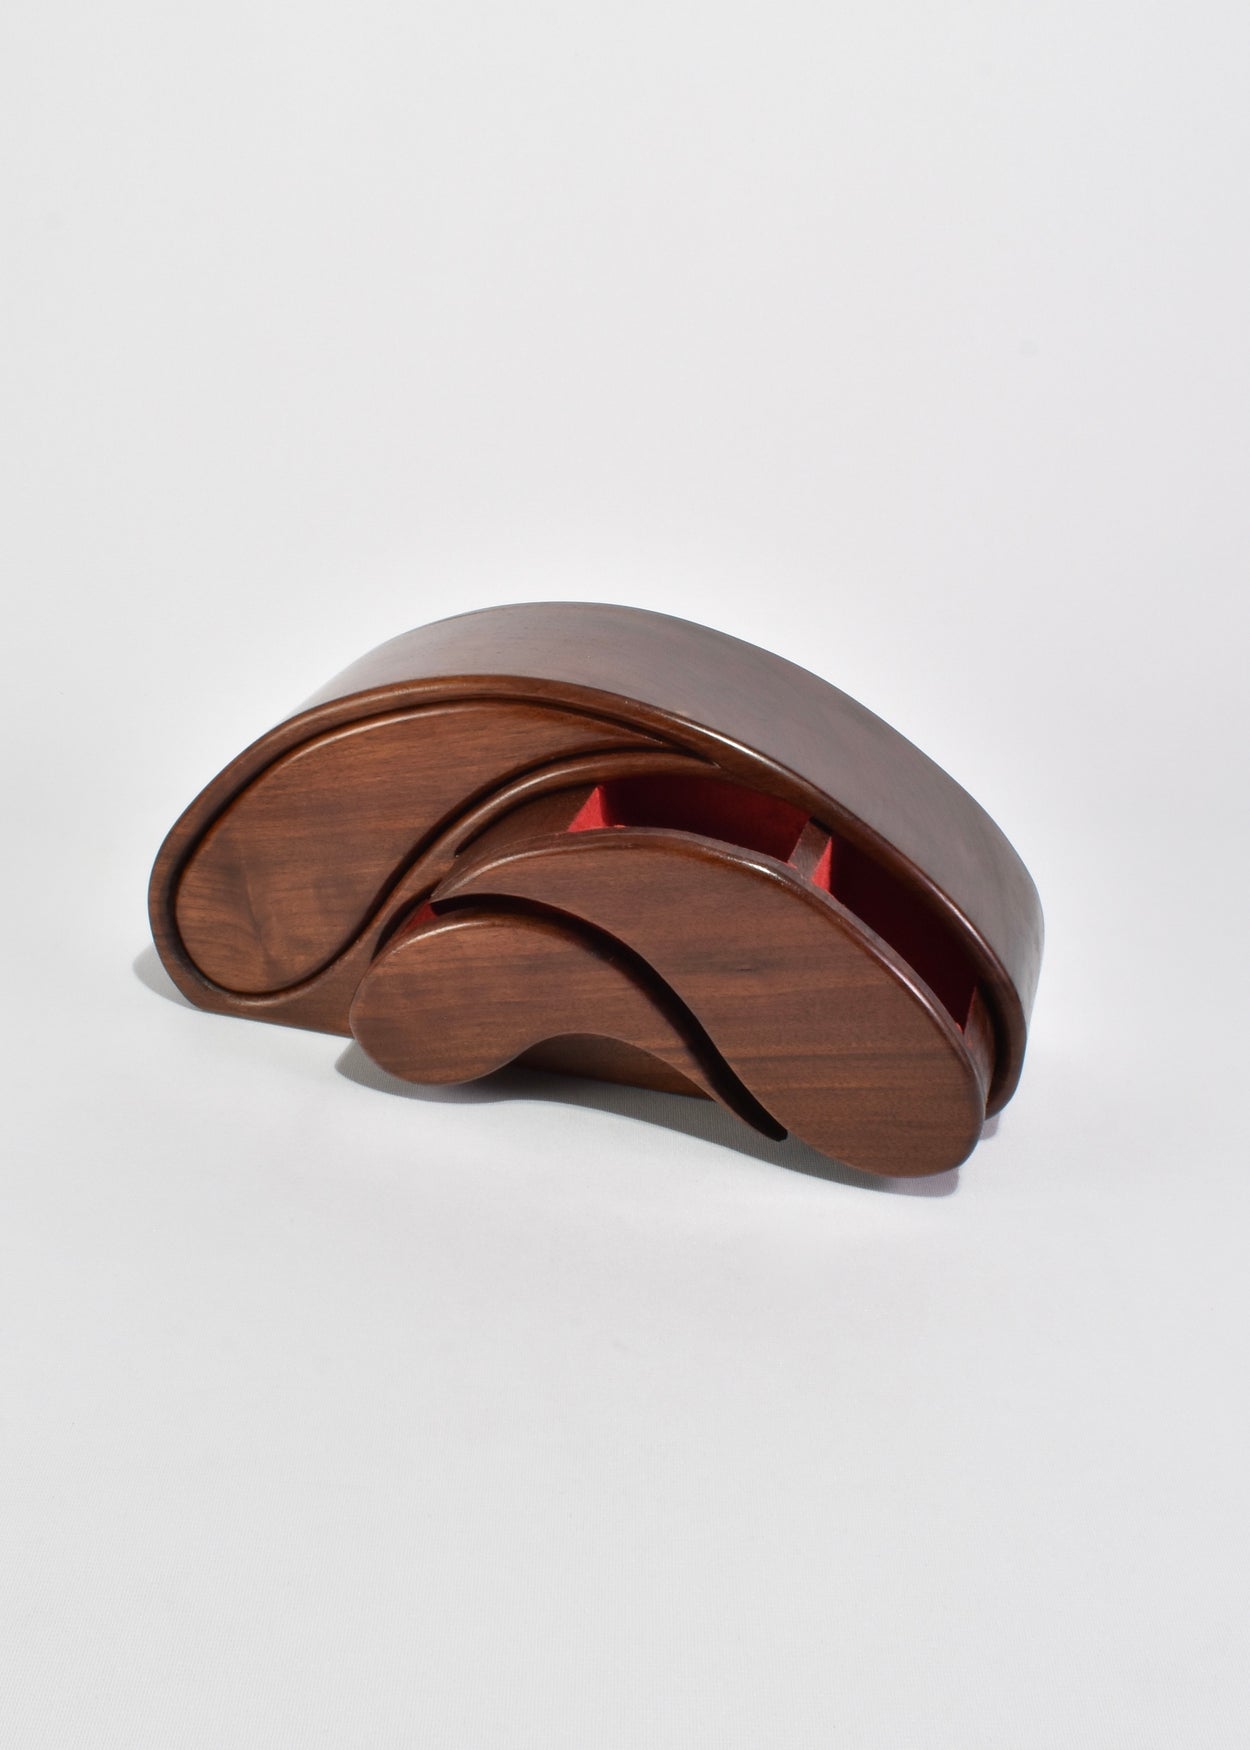 Curved Wooden Jewelry Box